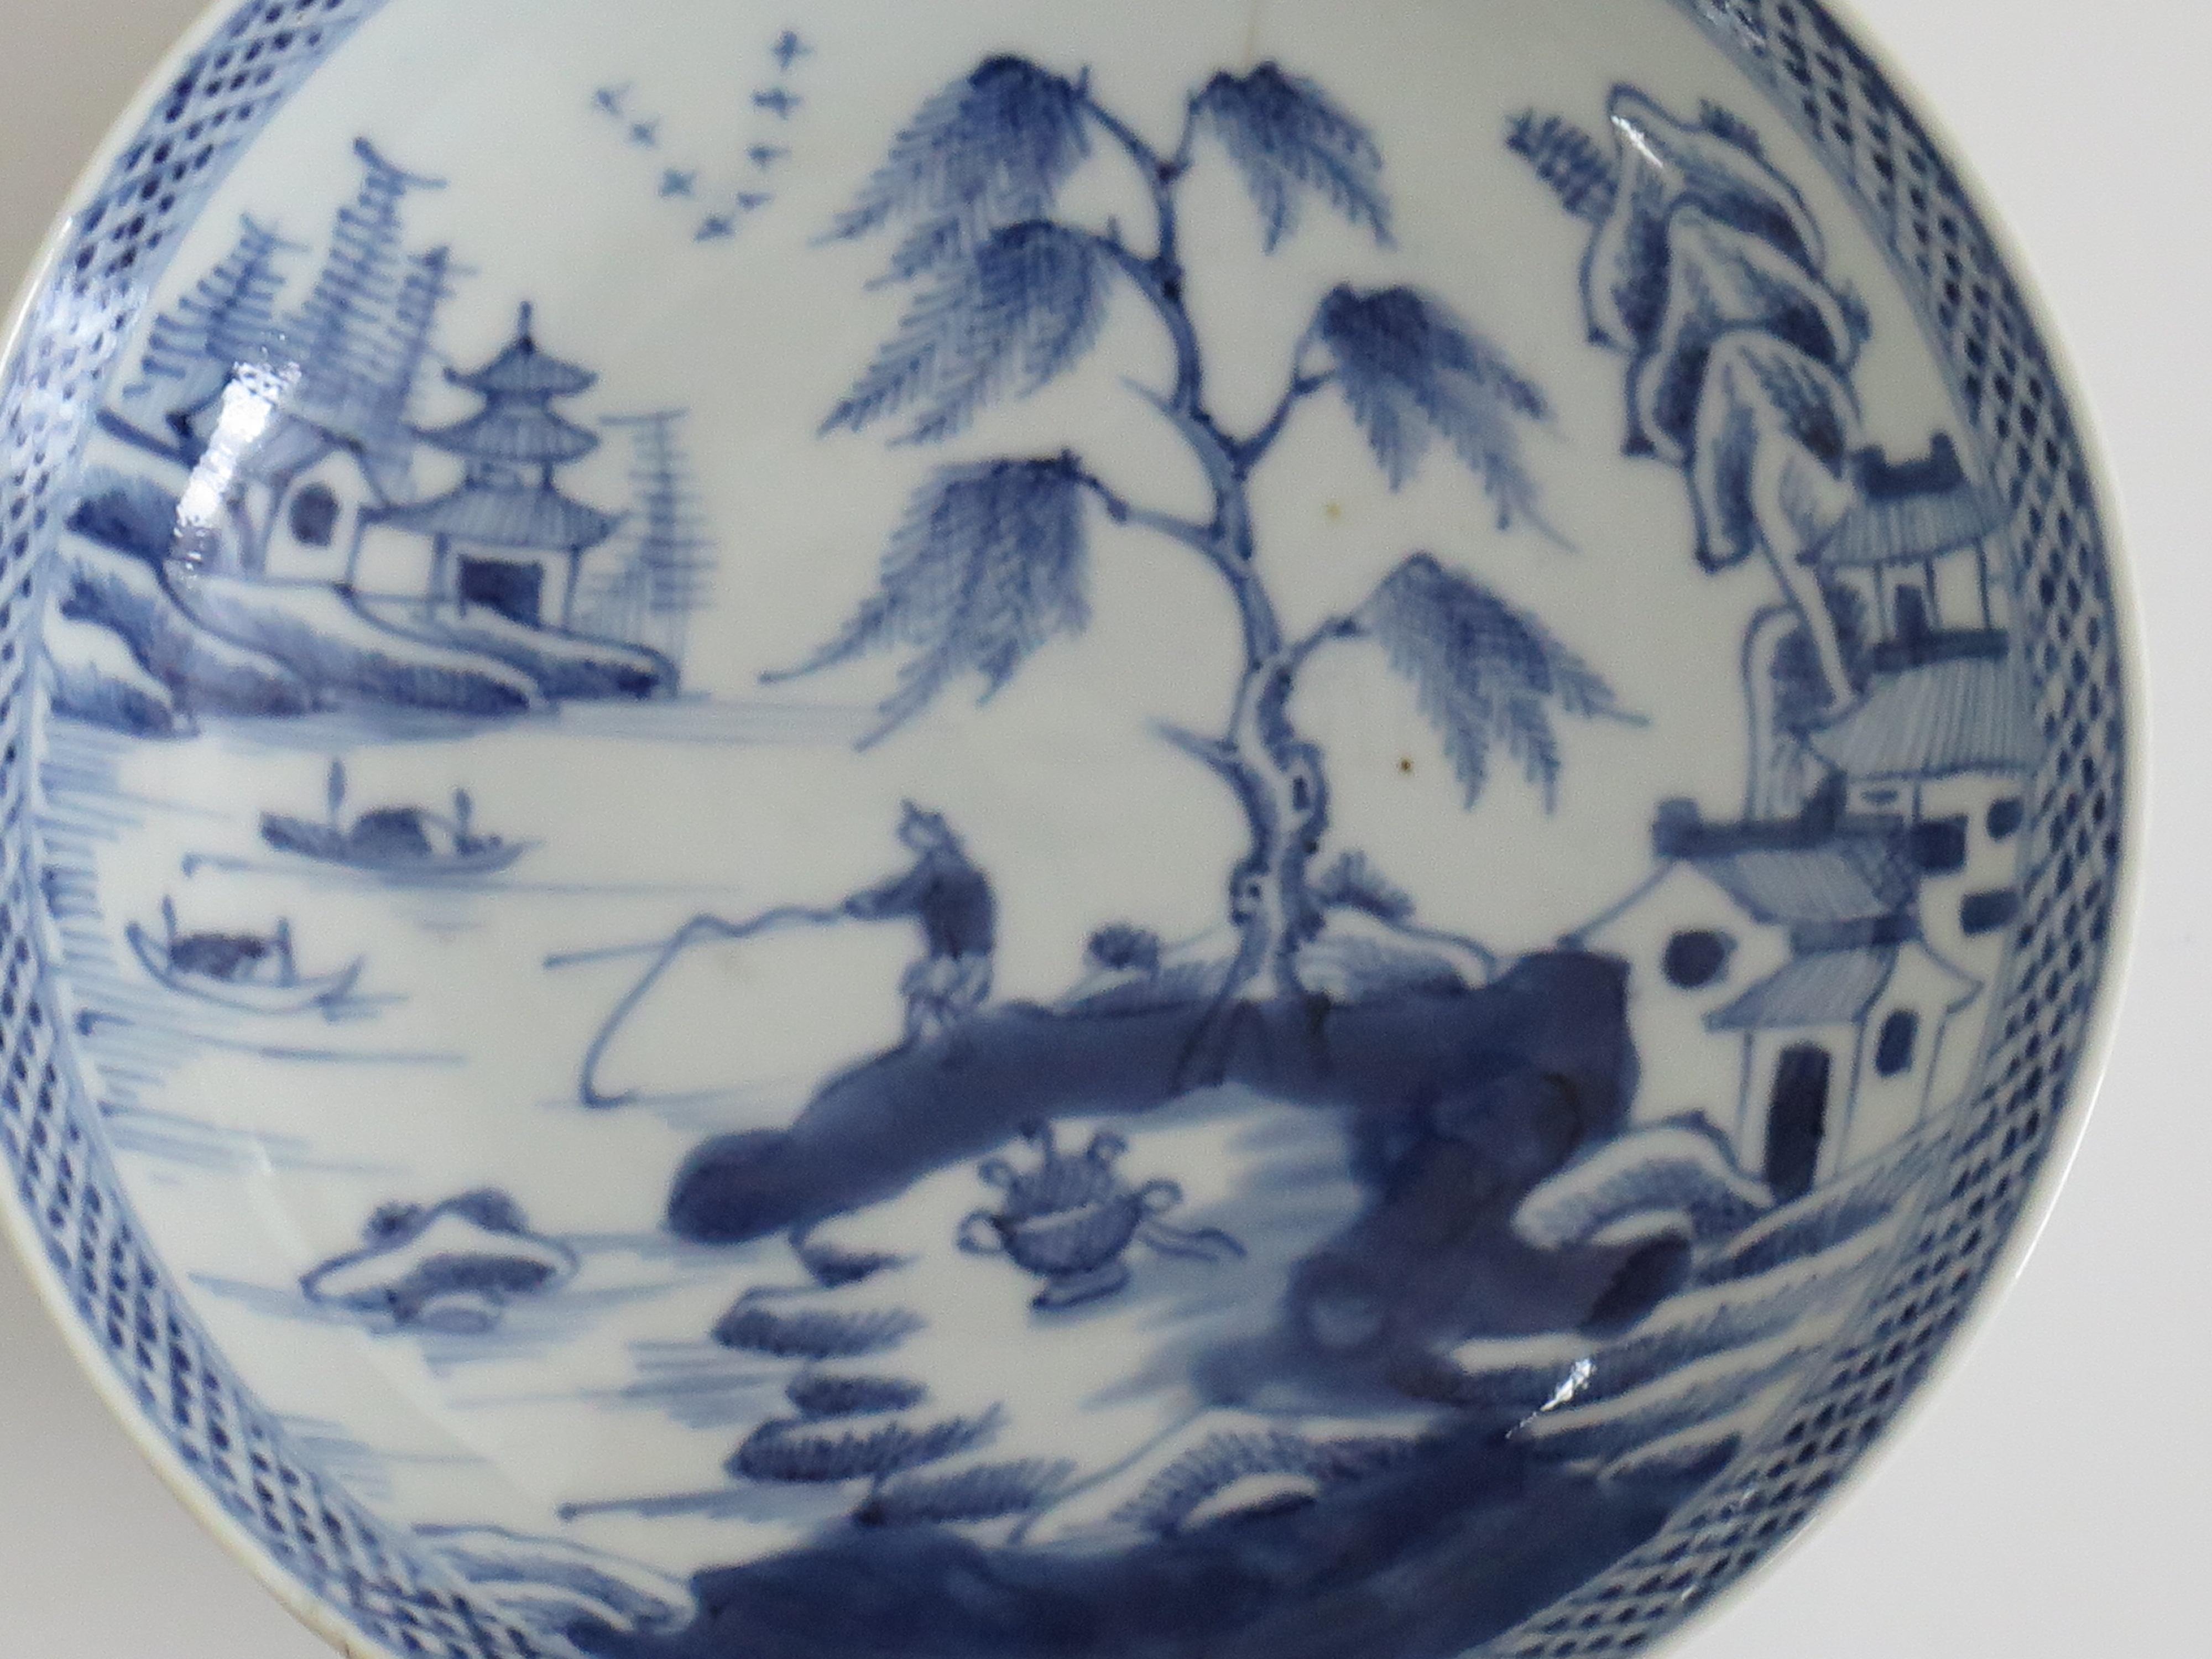 18th Century Chinese Export Porcelain Small Berry Bowl or Dish Blue & White, Late 18th C Qing